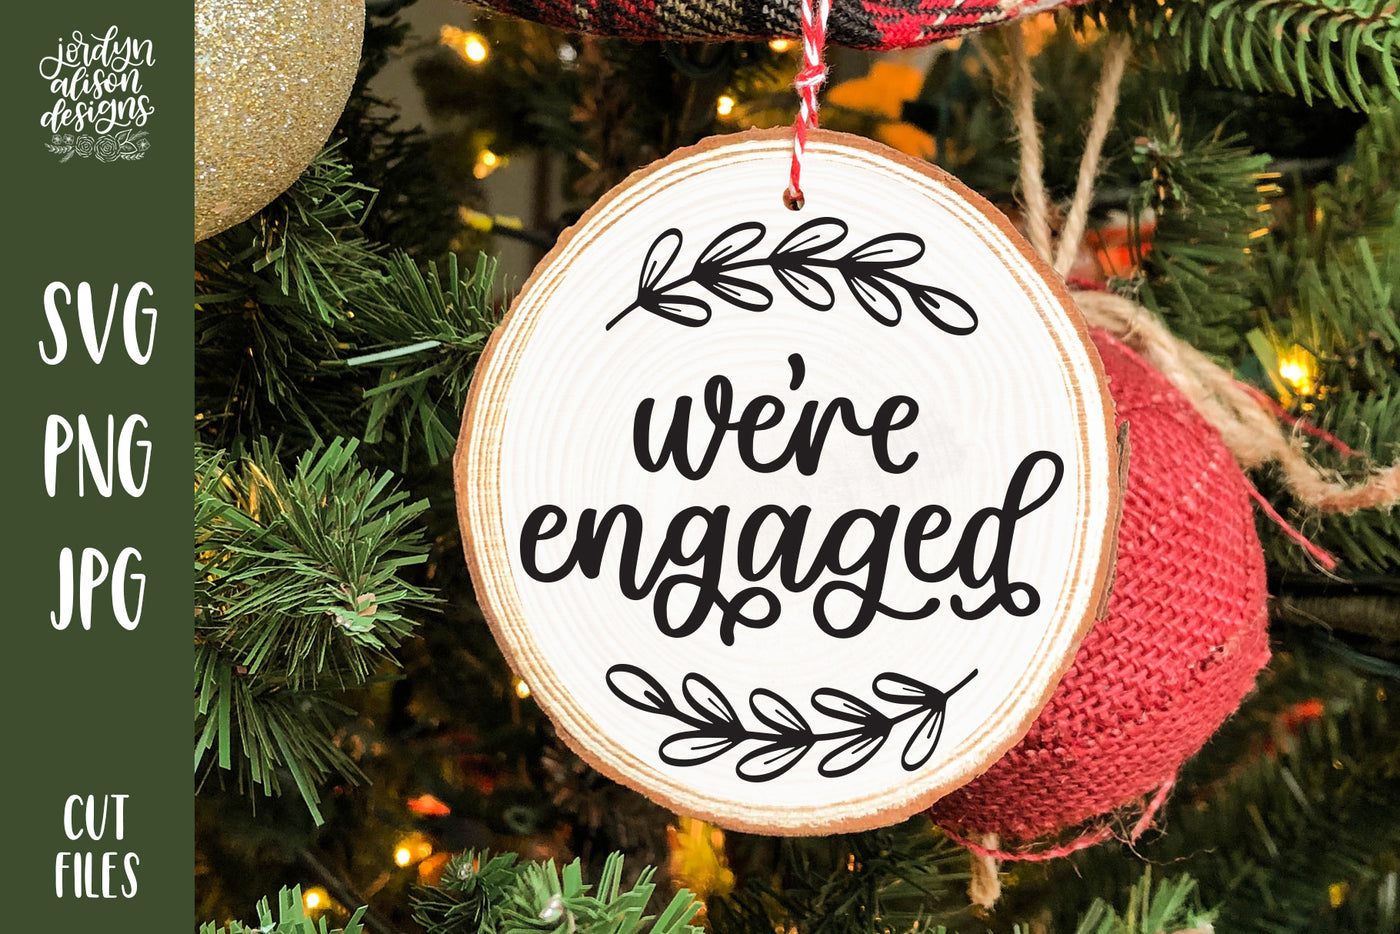 Handwritten text "We're Engaged" on Round Christmas Ornament. 